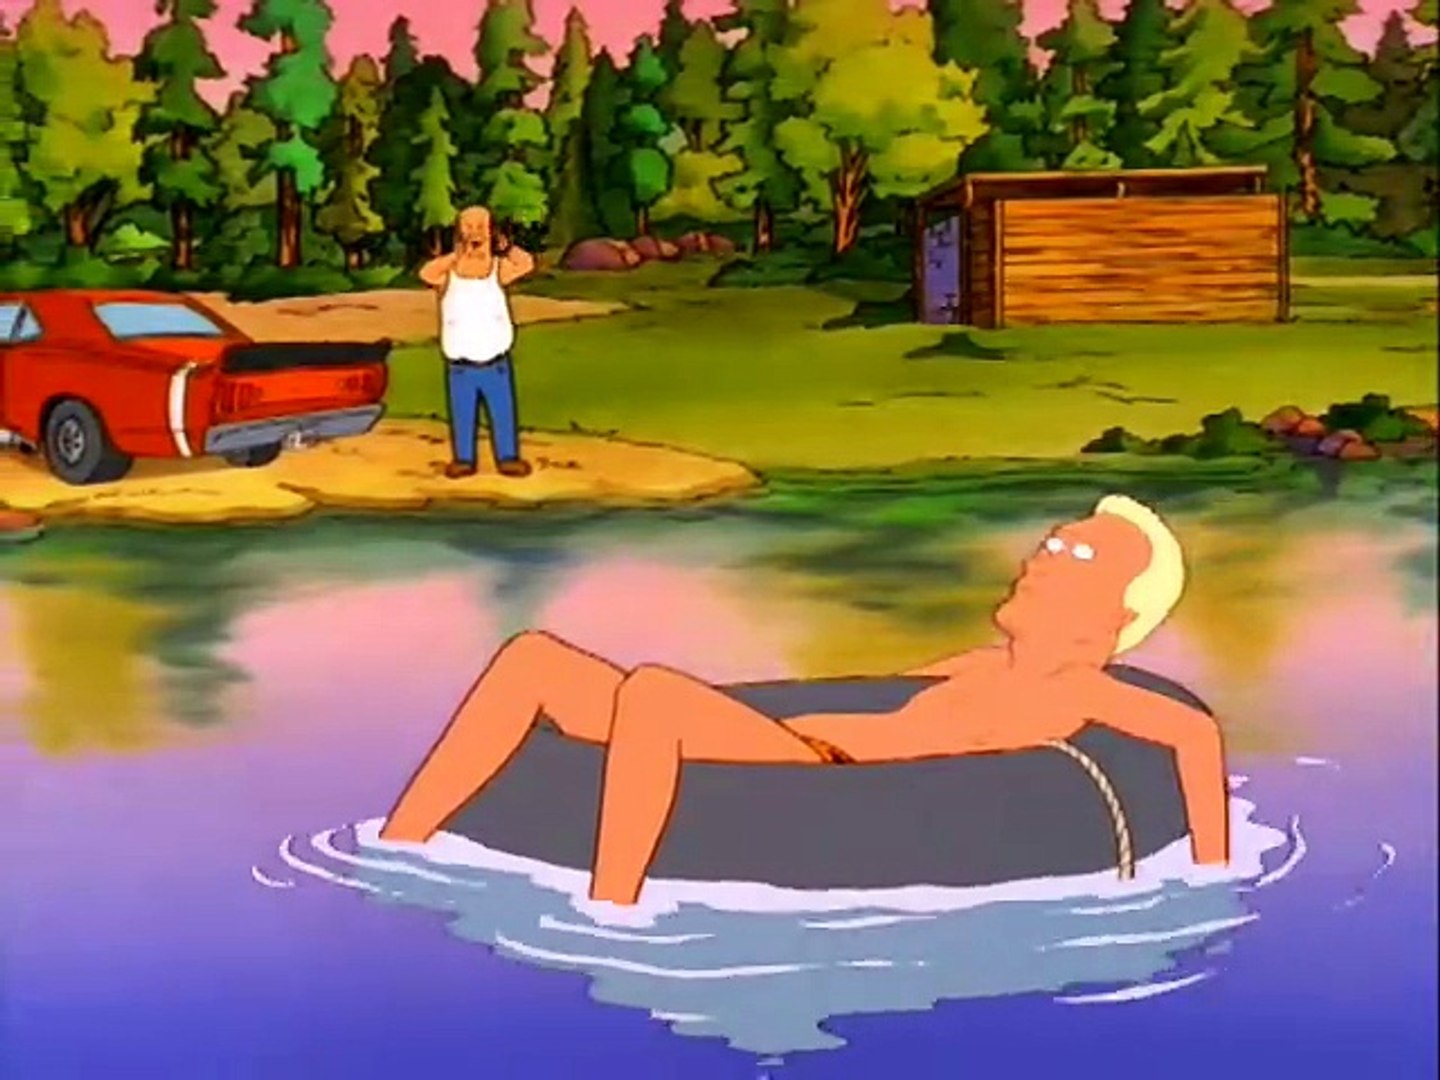 King of the Hill - S 7 E 20 - Racist Dawg - video Dailymotion